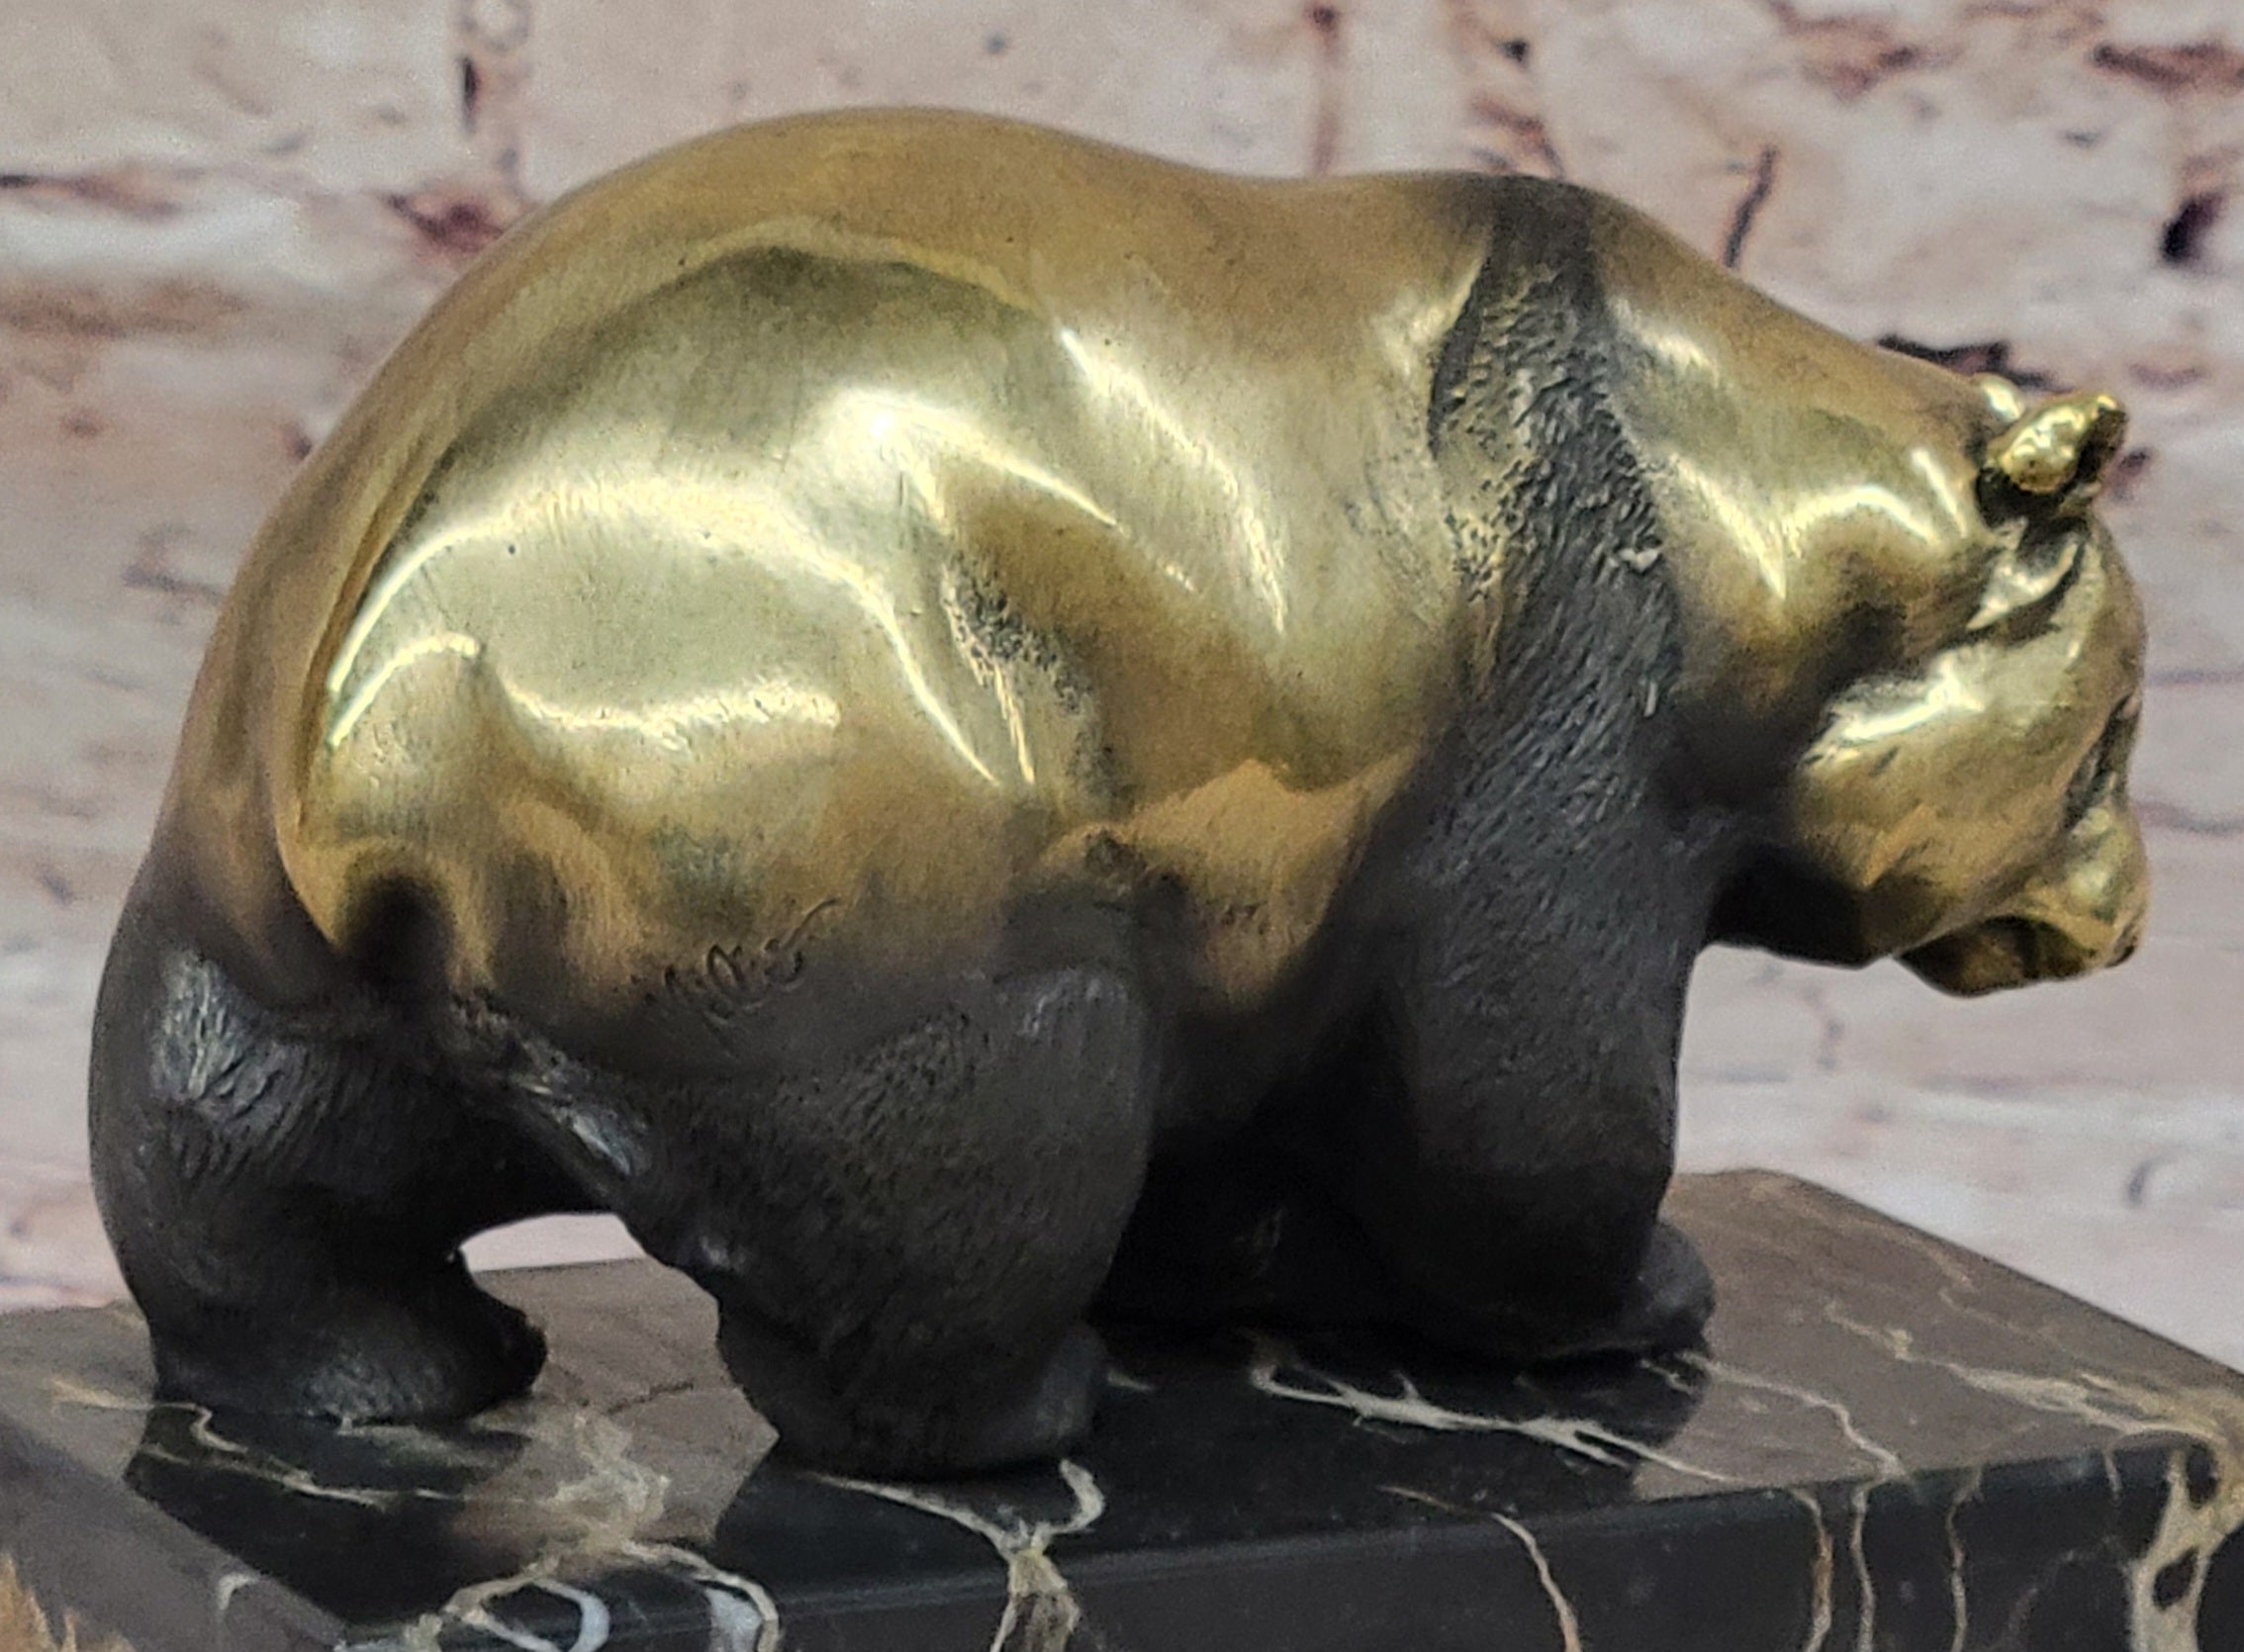 100% Solid Bronze Sculpture - The Panda Hand Made by Miguel Lopez Known as Milo